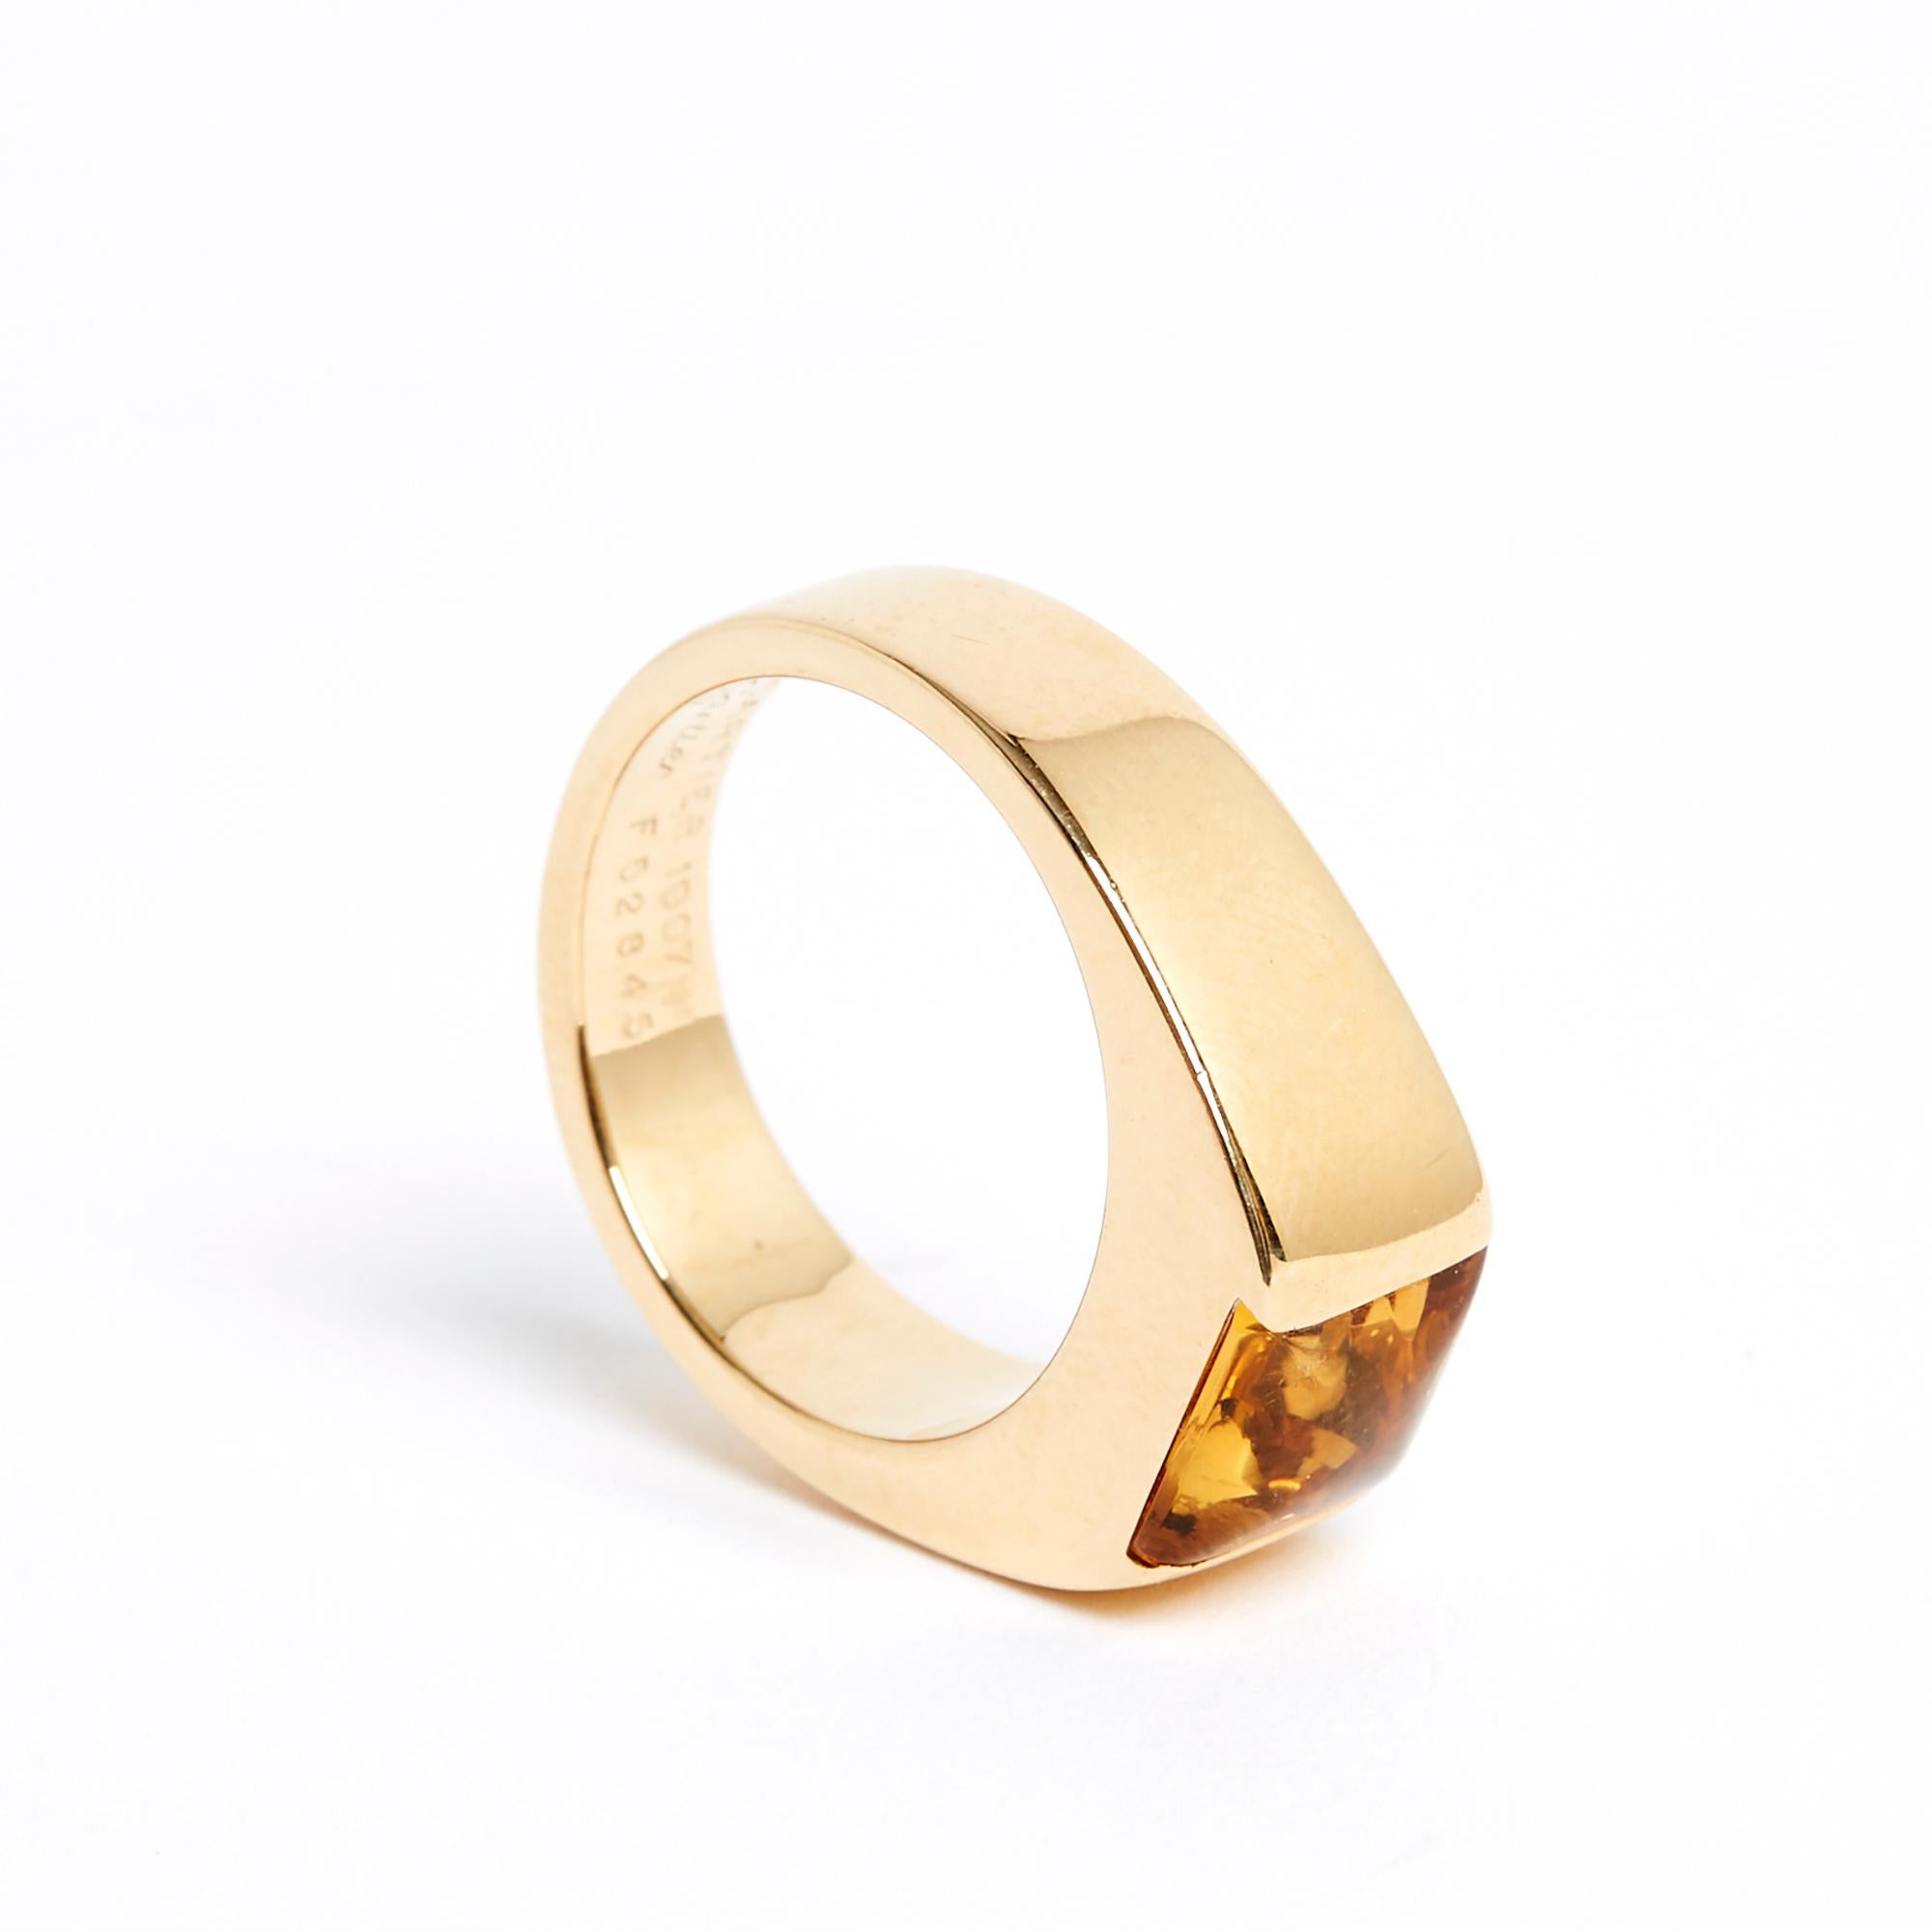 Cartier Tank model ring in 18-carat yellow gold decorated with a citrine. Finger size 53 or US6.25, internal diameter 1.69 cm. The ring has been cleaned and probably lightly repolished by the Cartier workshops and it is delivered (without